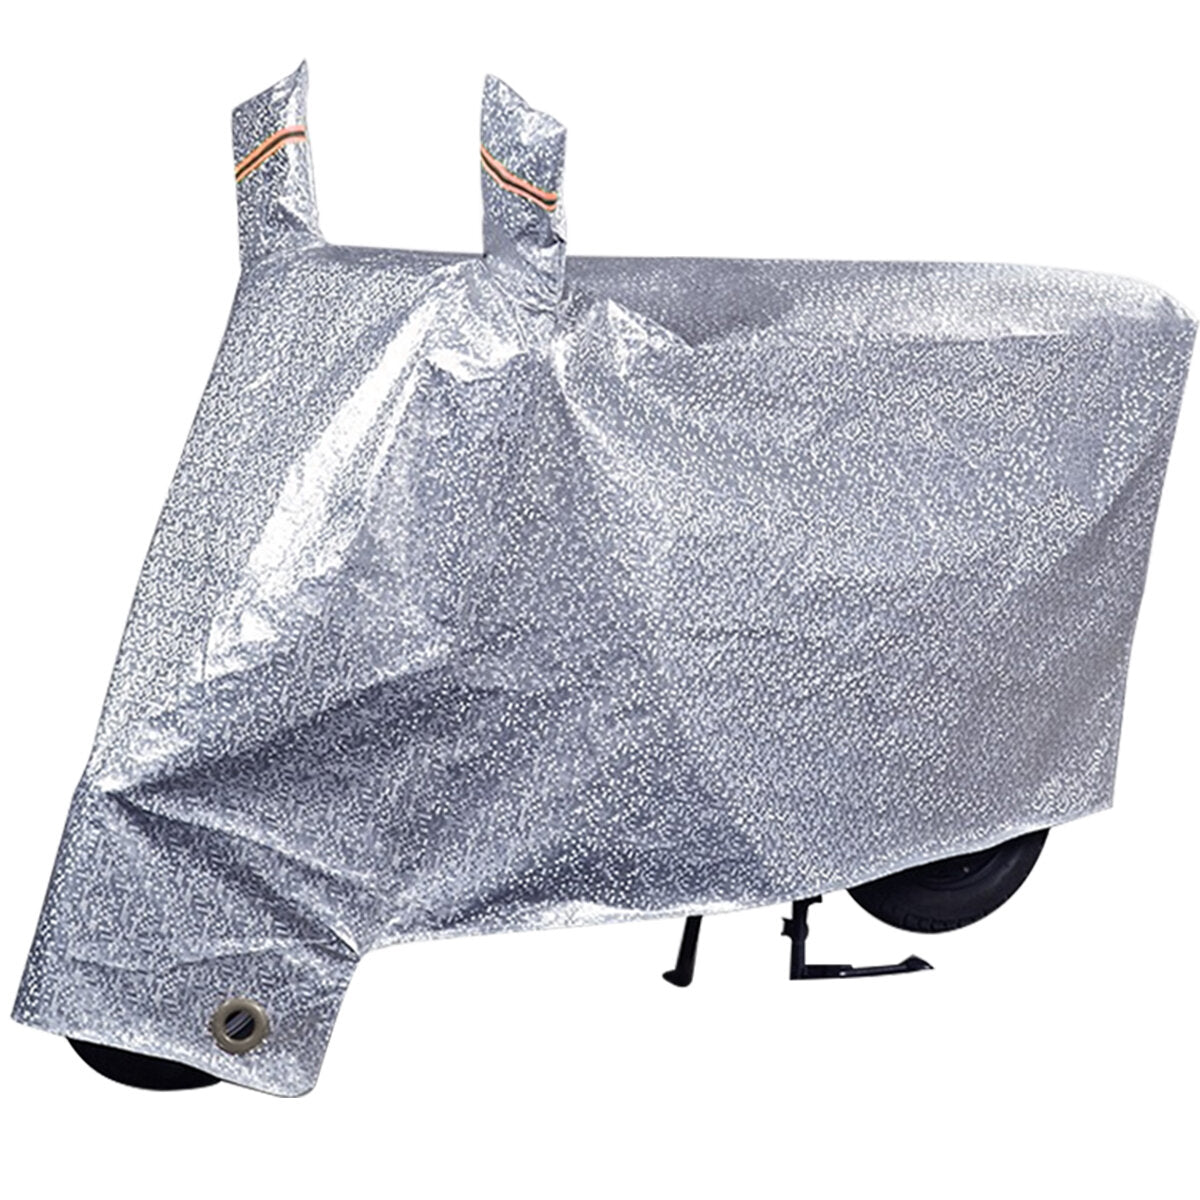 Motorcycle Cover Shelter Sunproof Waterproof Dustproof Protection